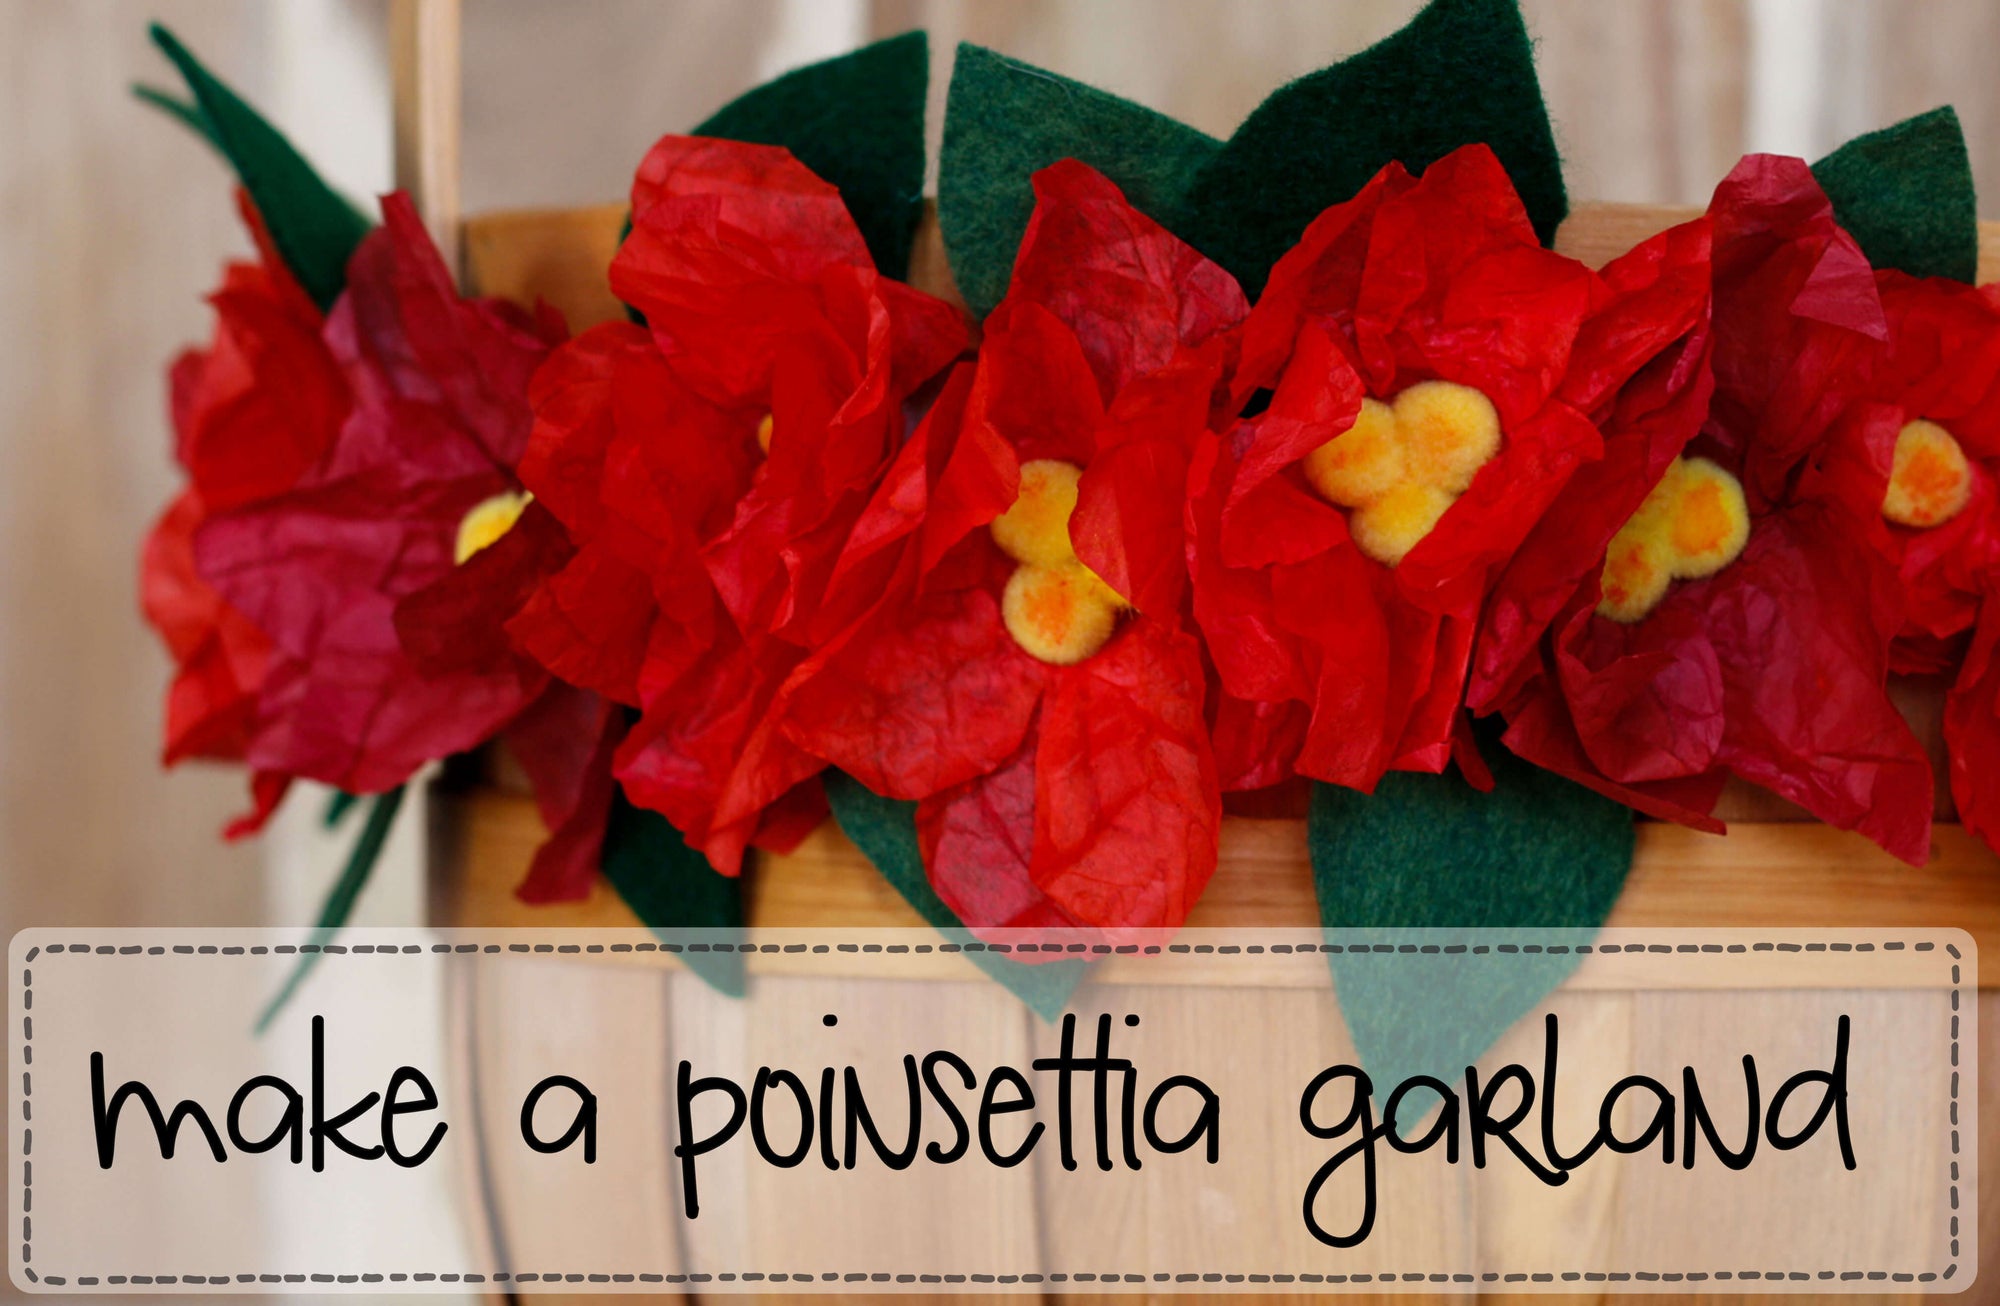 Save Those Bottle-Caps - They're the base for these pretty DIY poinsettias!